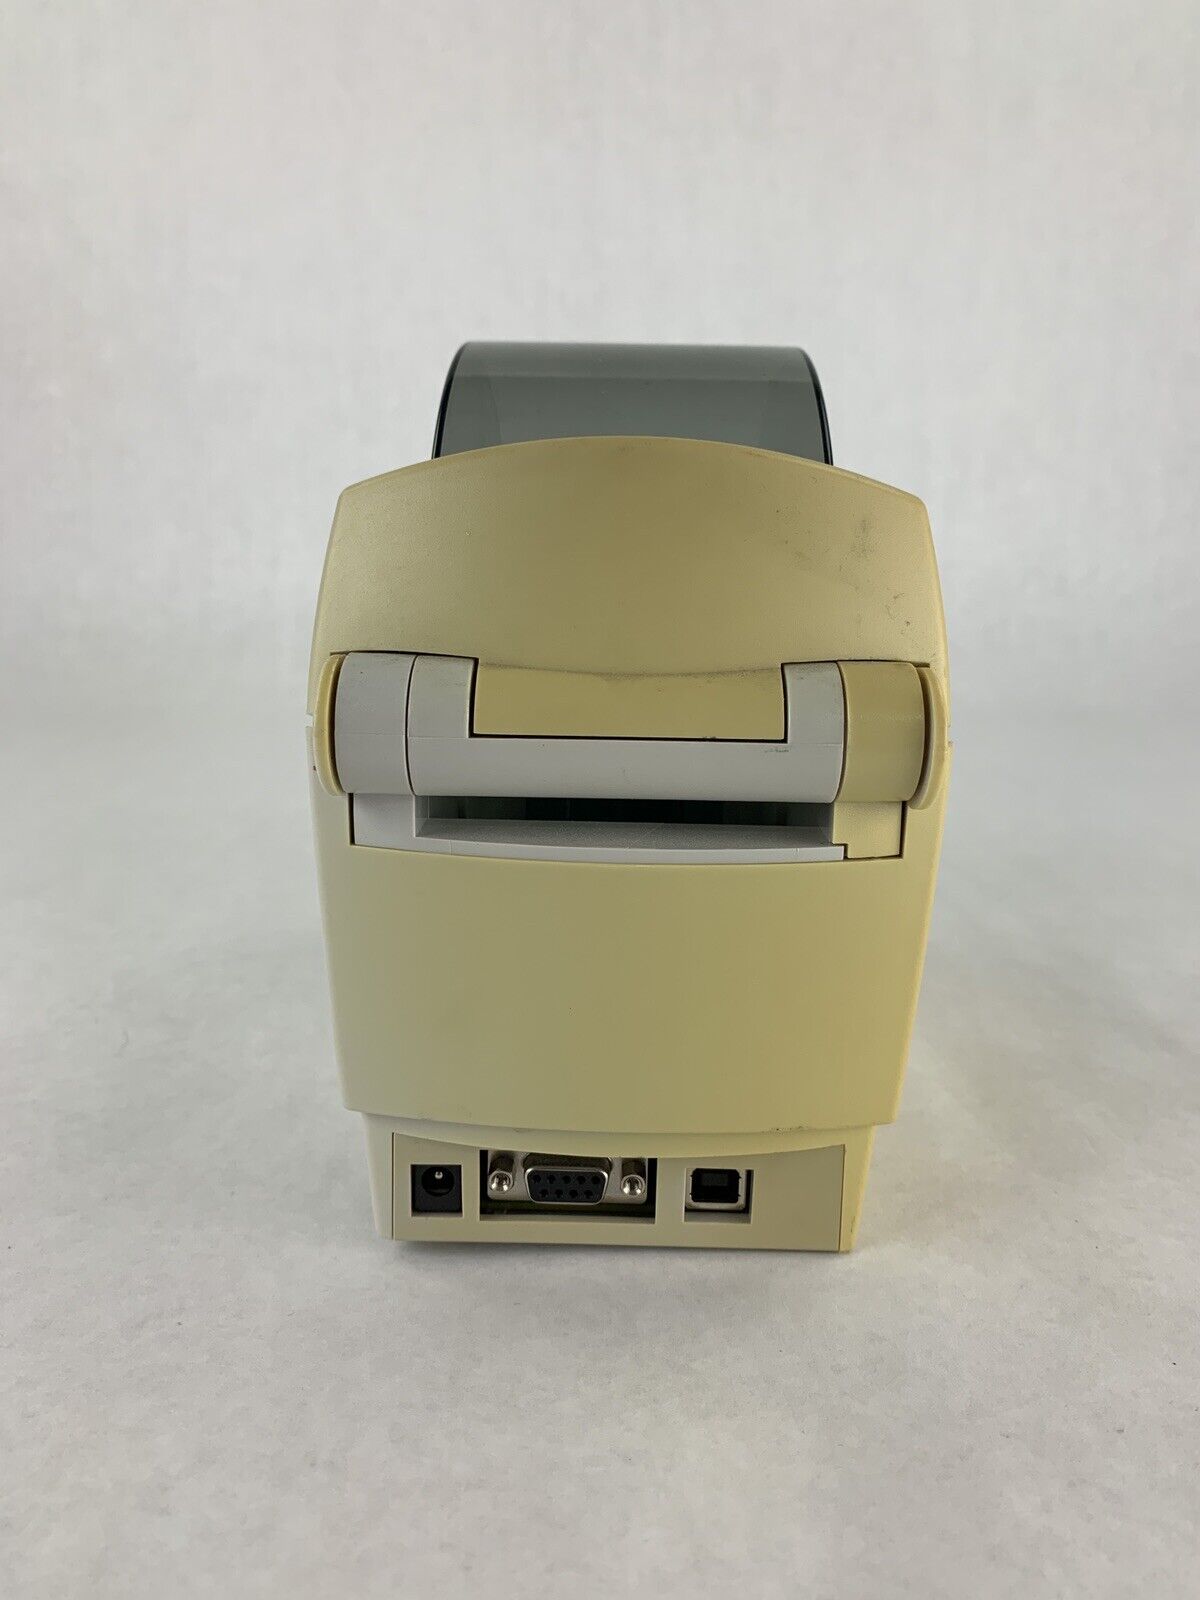 Zebra LP2824 Plus Thermal Printer No Power Supply For Parts and Repair Untested